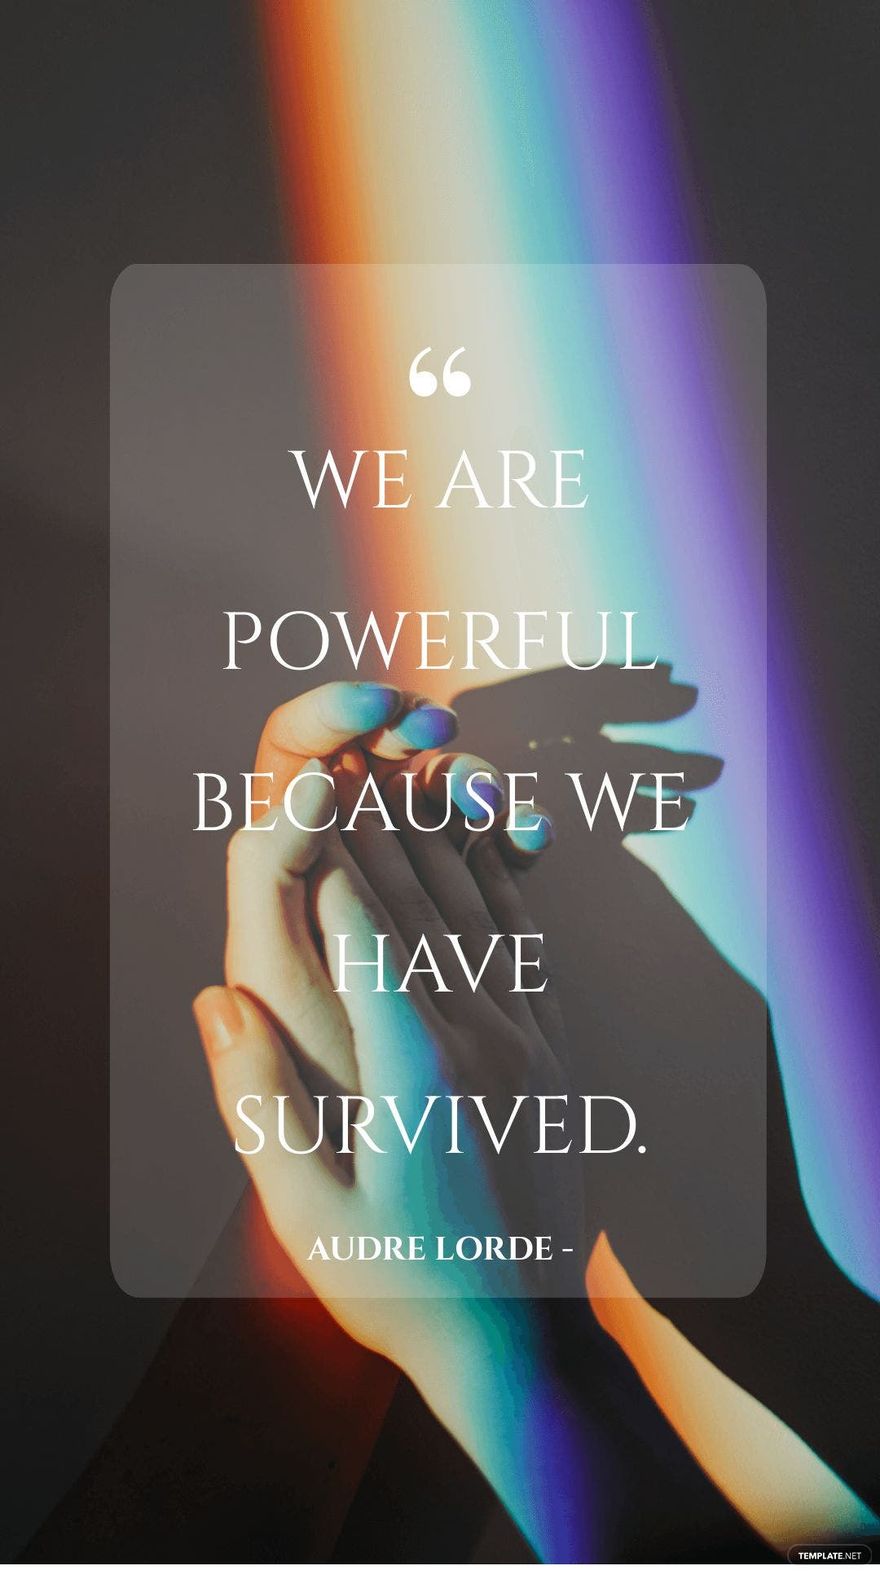 Audre Lorde - We are powerful because we have survived. in JPG